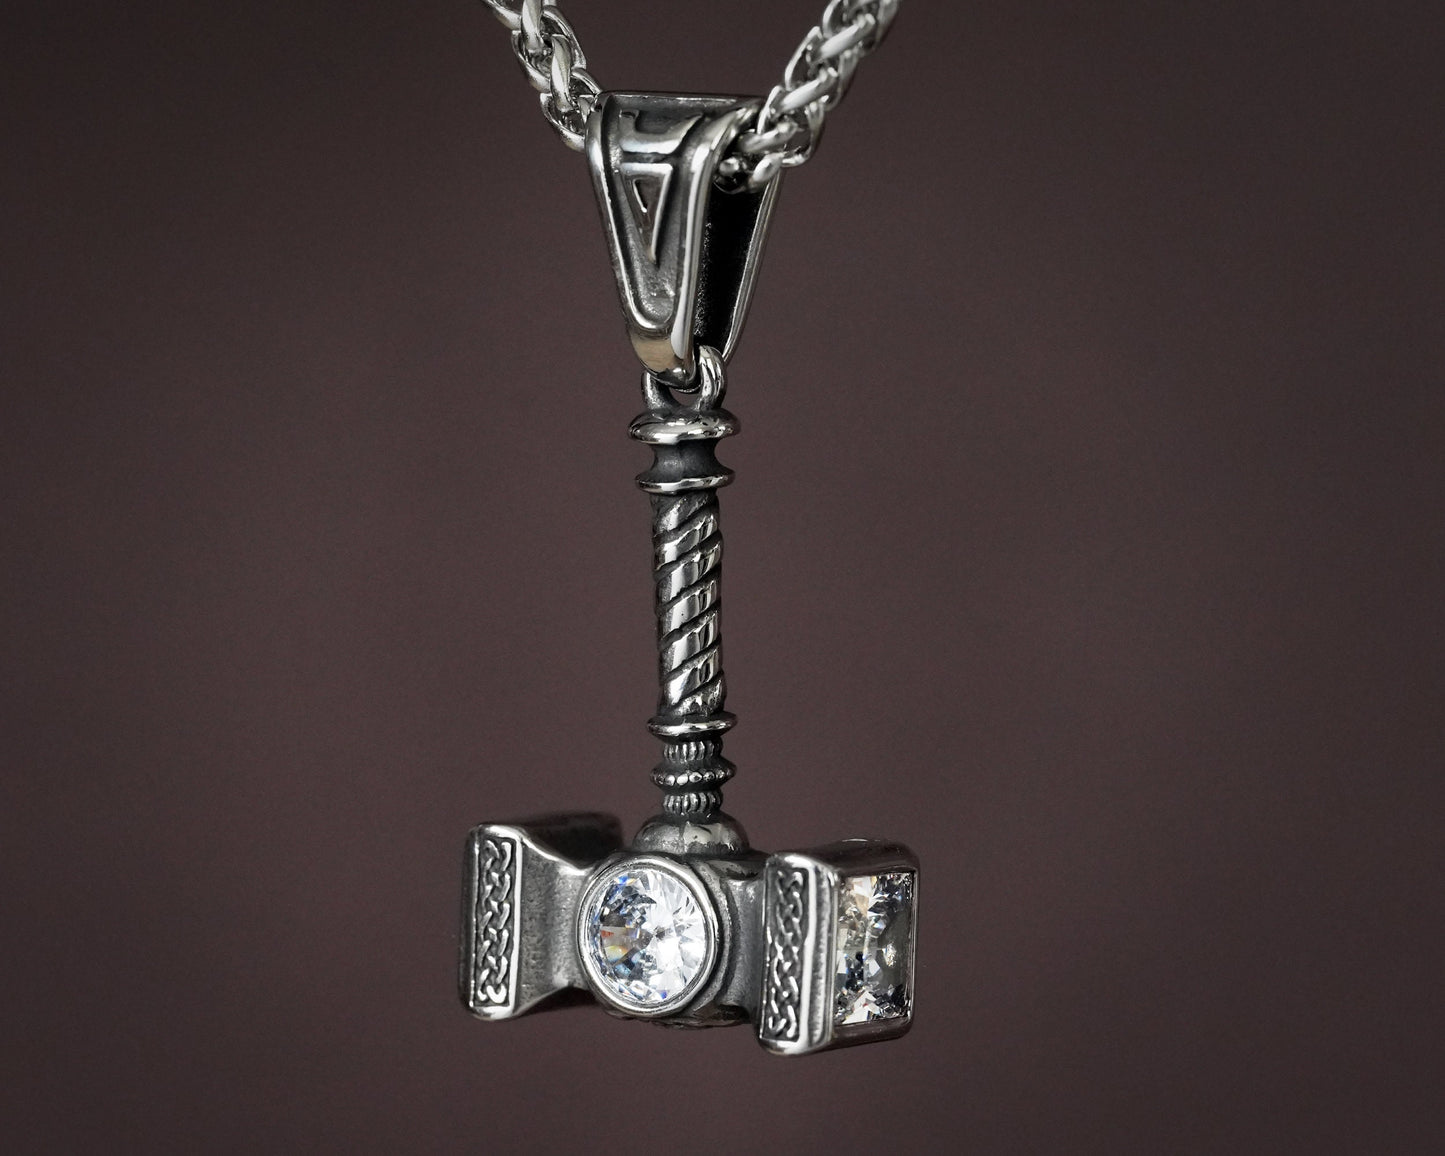 Handmade Viking Thor Hammer with Gemstone Crystals Necklace Pendant For Men and Women With Strong 22 Inches Long Chain, Golden / Silver - Baldur Jewelry